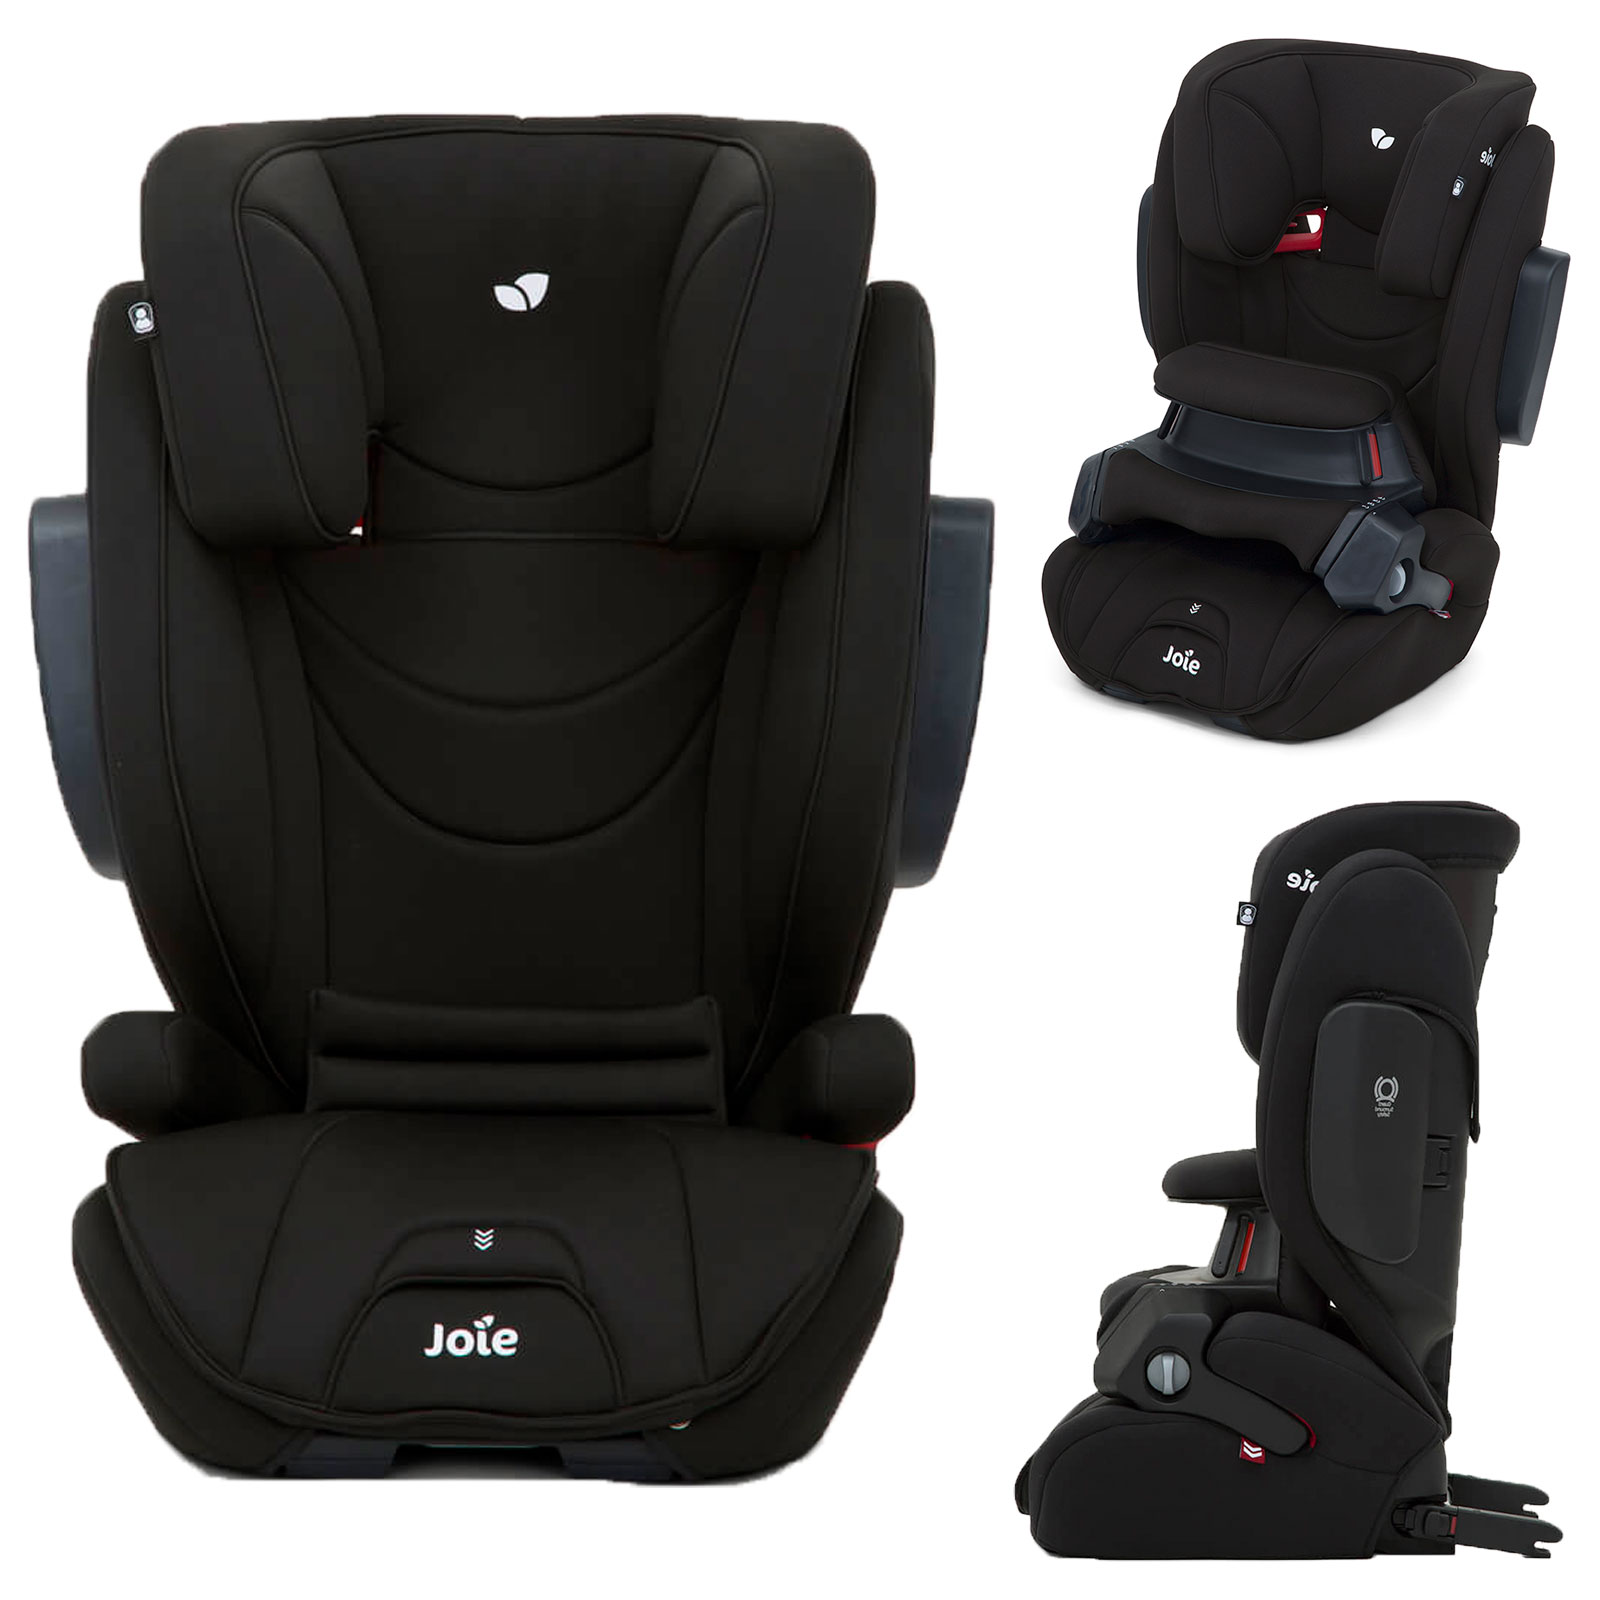 Joie traver shielded booster car seat